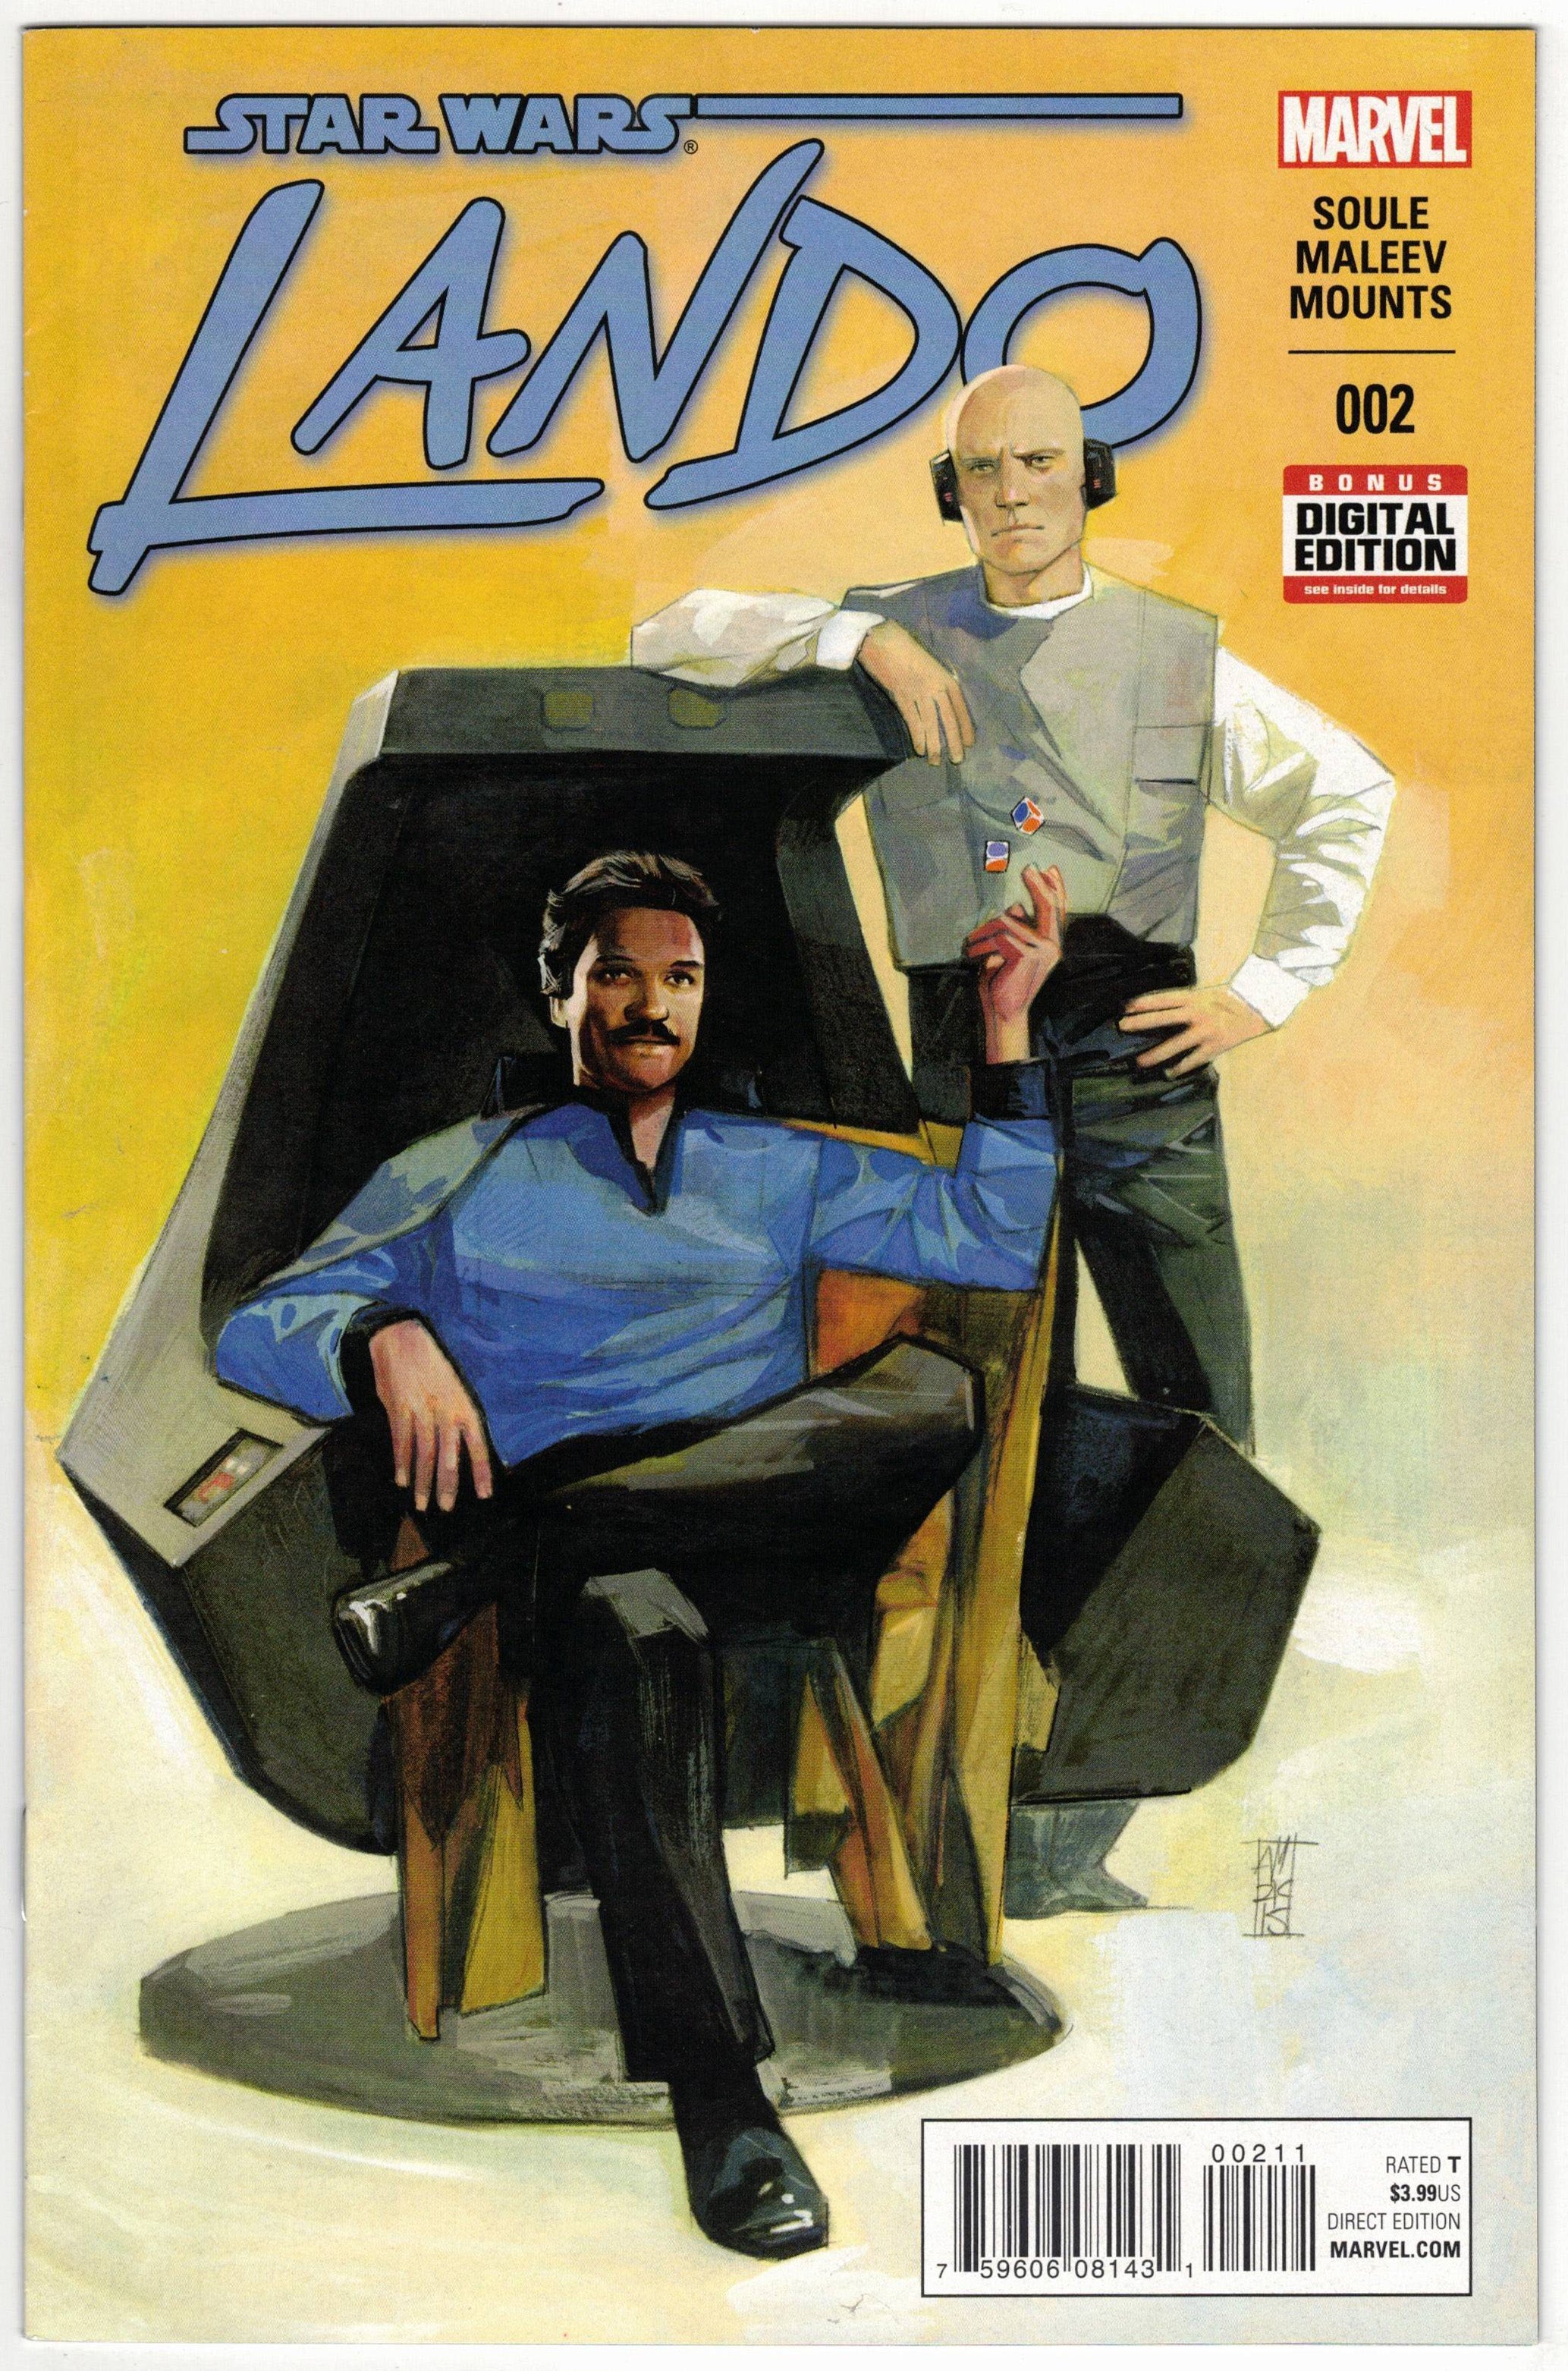 Photo of Star Wars: Lando (2015) Issue 2 - Near Mint Comic sold by Stronghold Collectibles